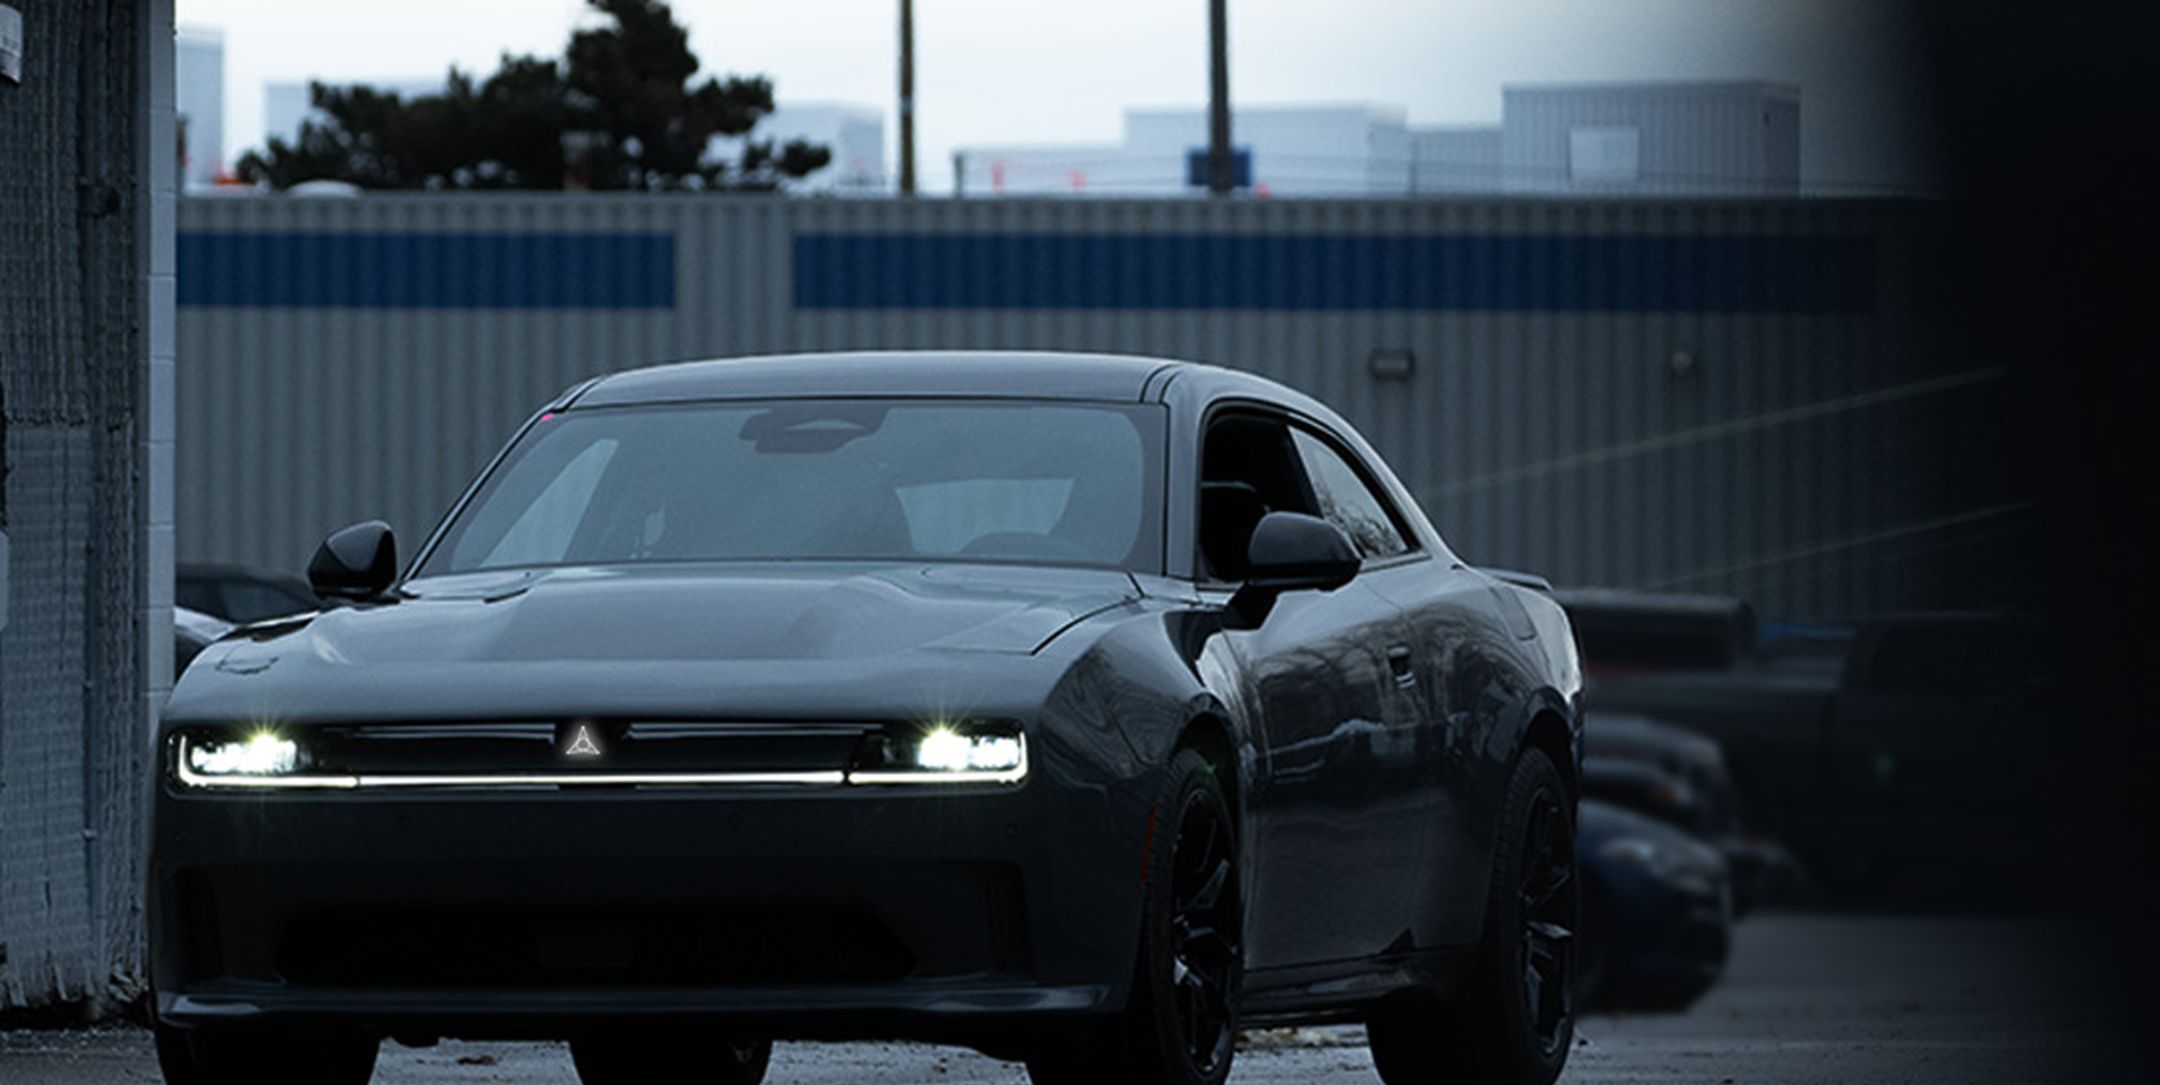 Check Out the Door Count of This Pre-Production 2025 Dodge Charger